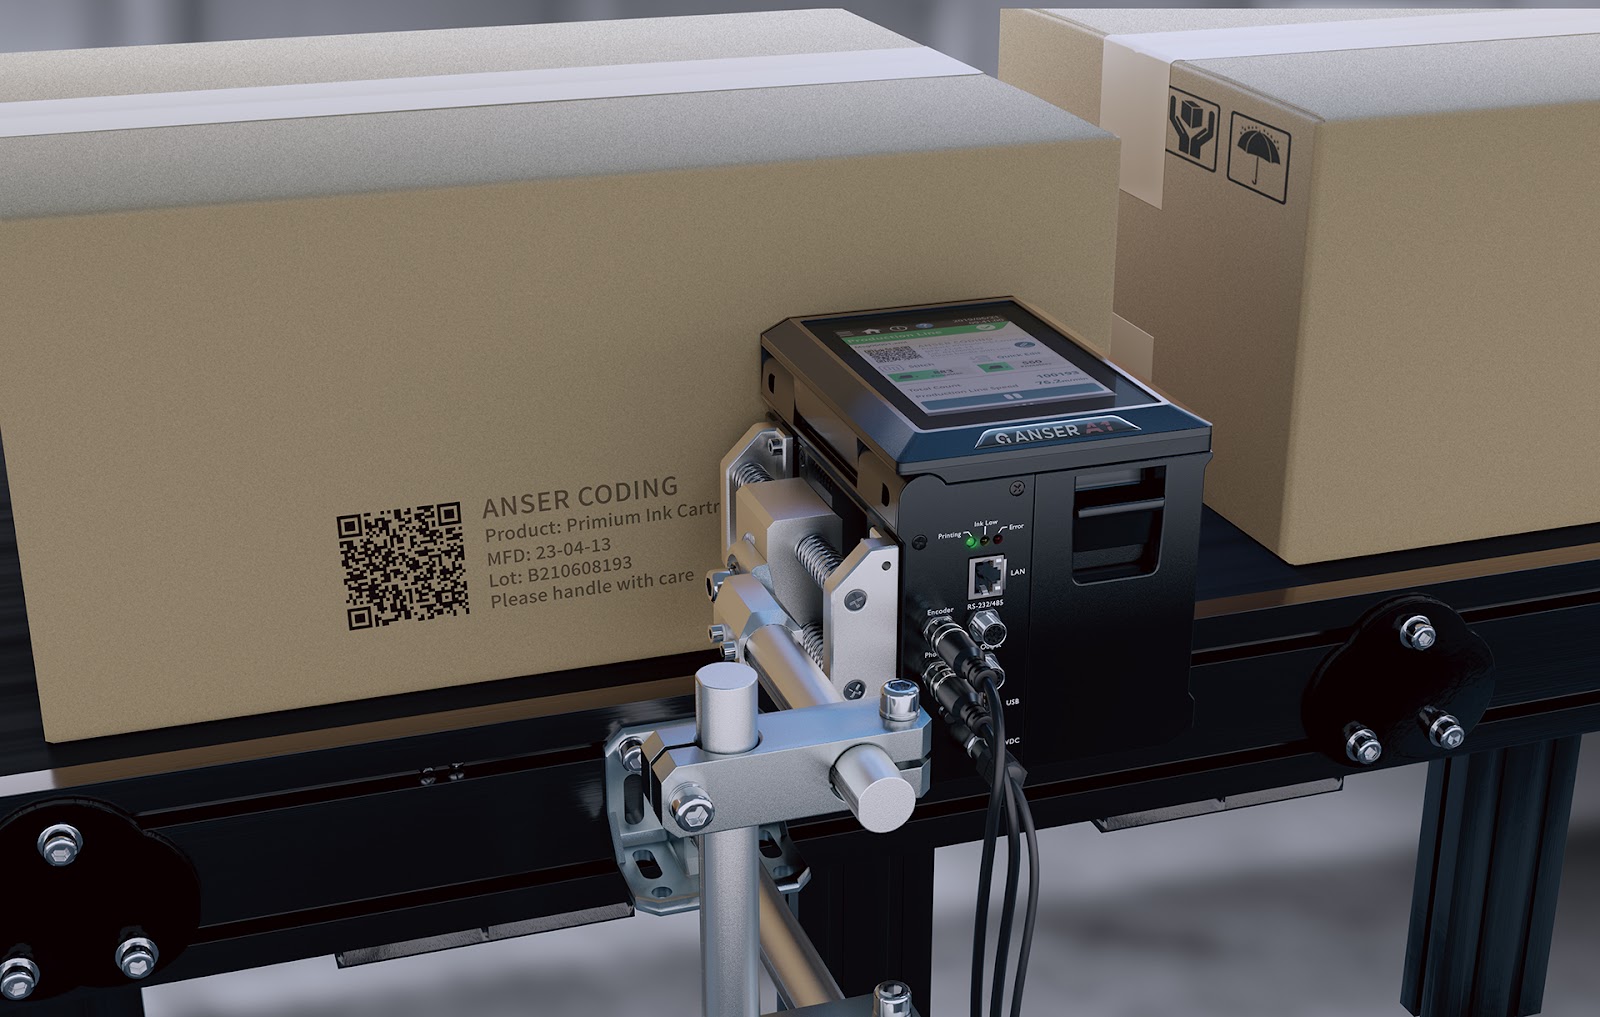 Picture of Anser A1 used for printing on cardboard boxes